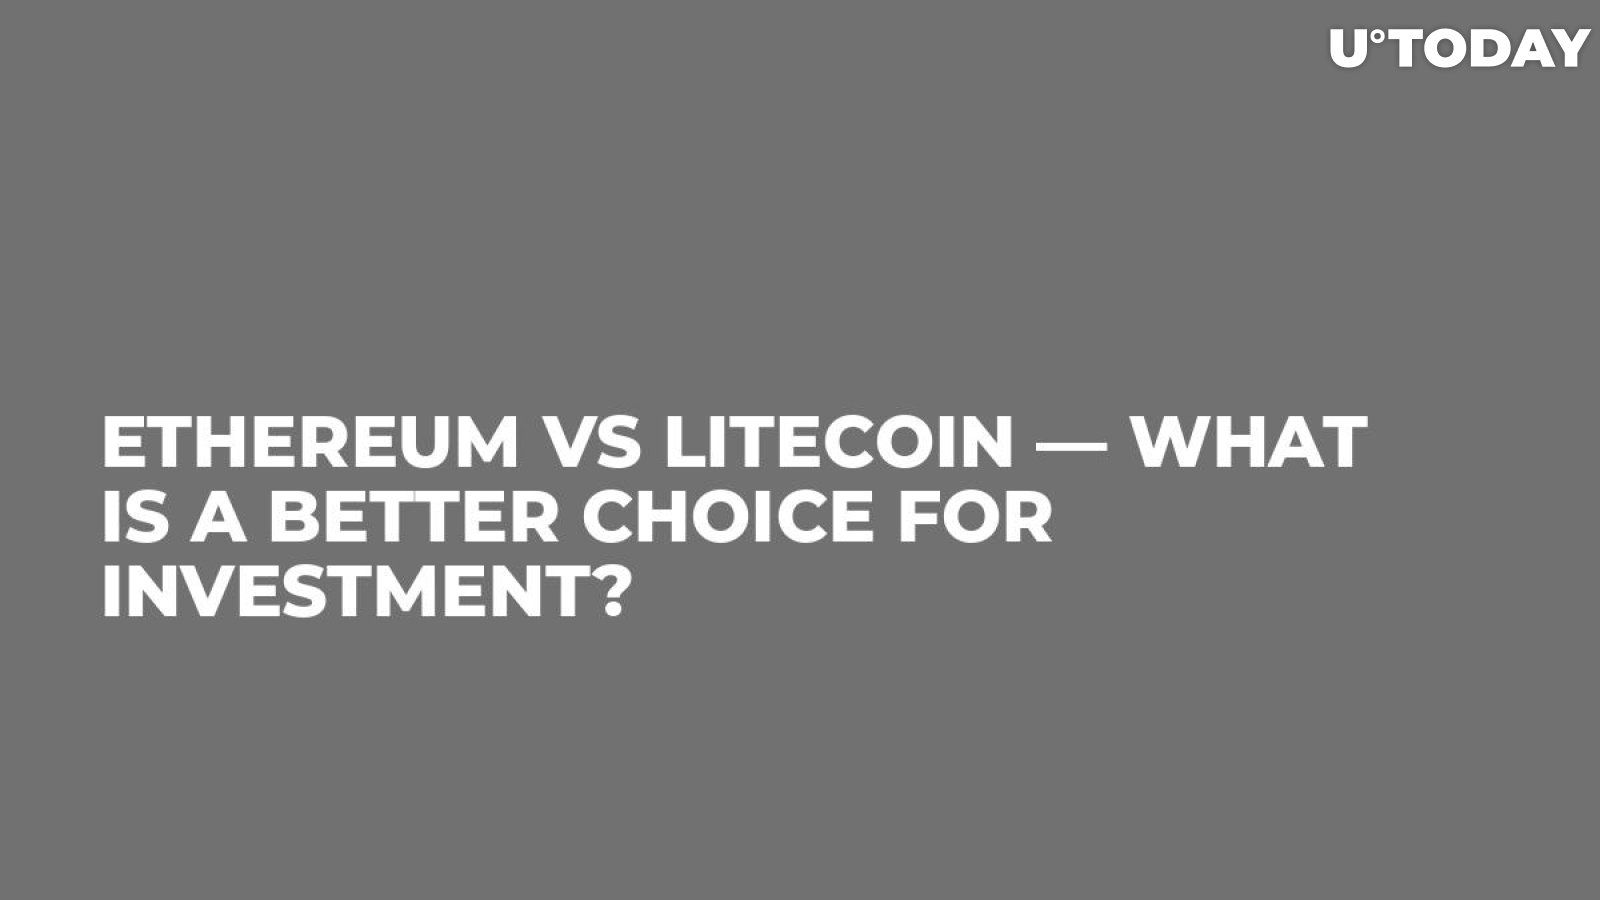 Ethereum vs Litecoin — What Is a Better Choice for Investment?